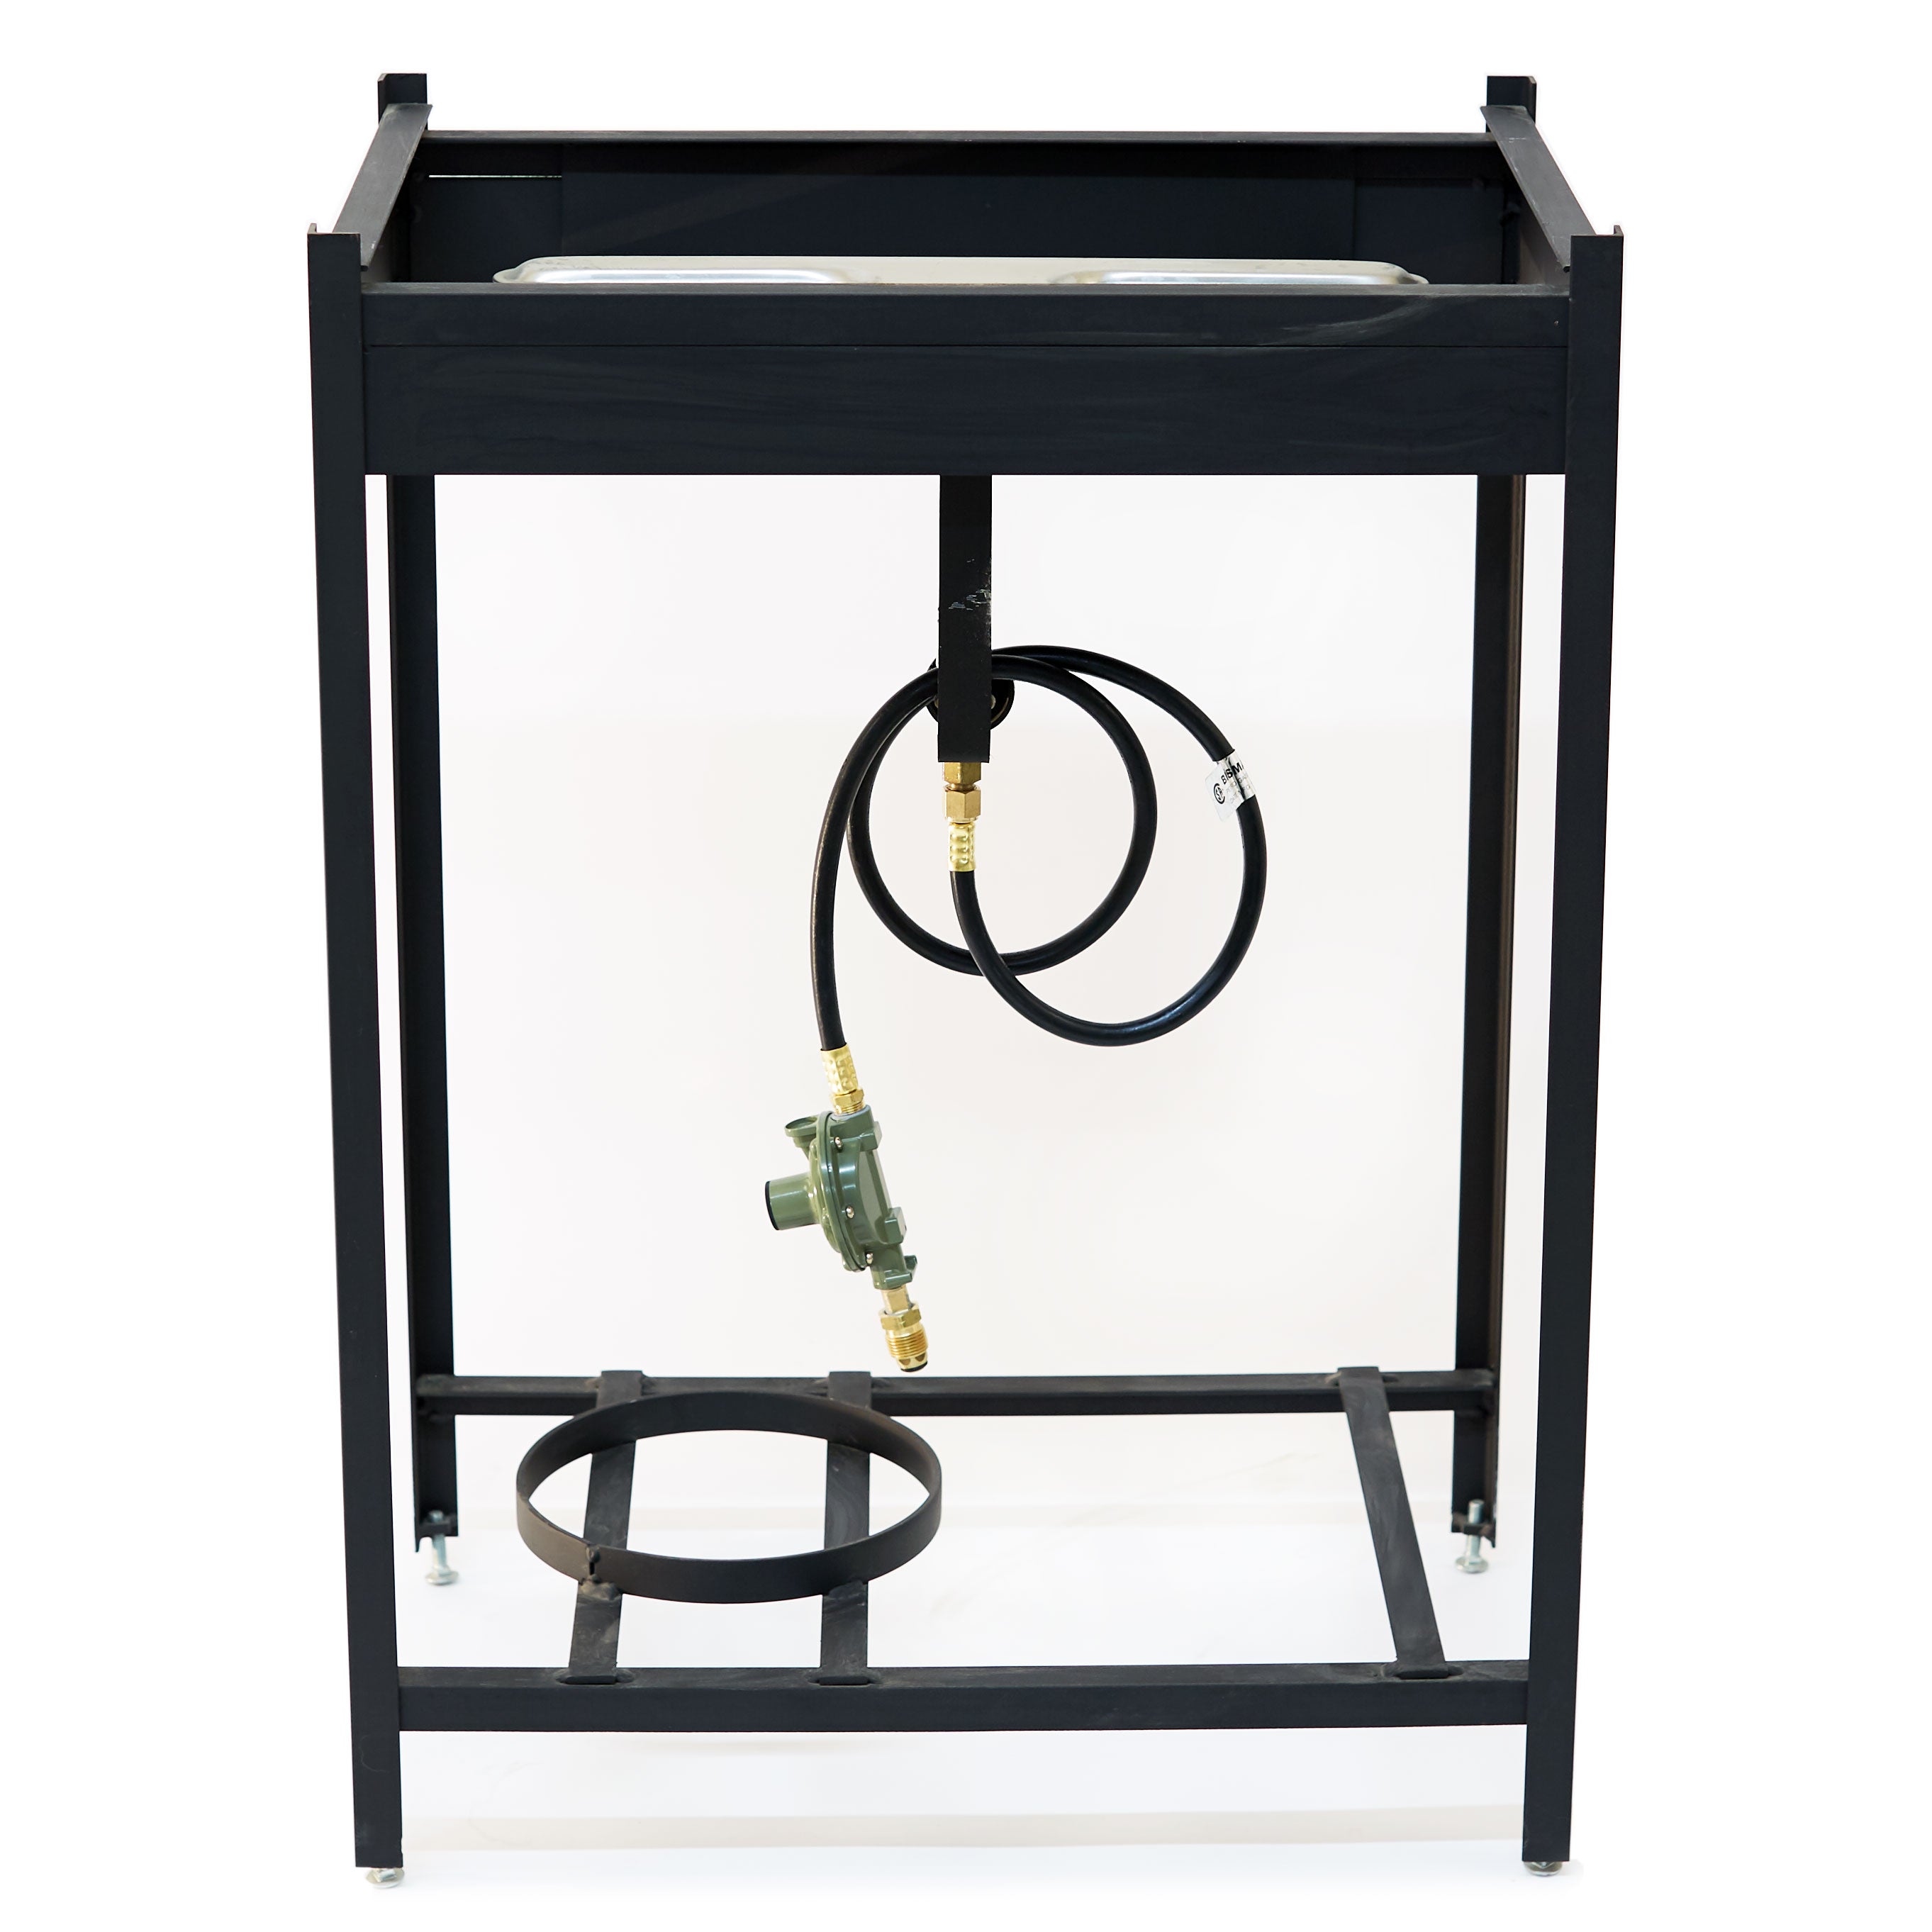 16" x 24" Stand w/Gas Burner,  Regulator Hose & Container Tray